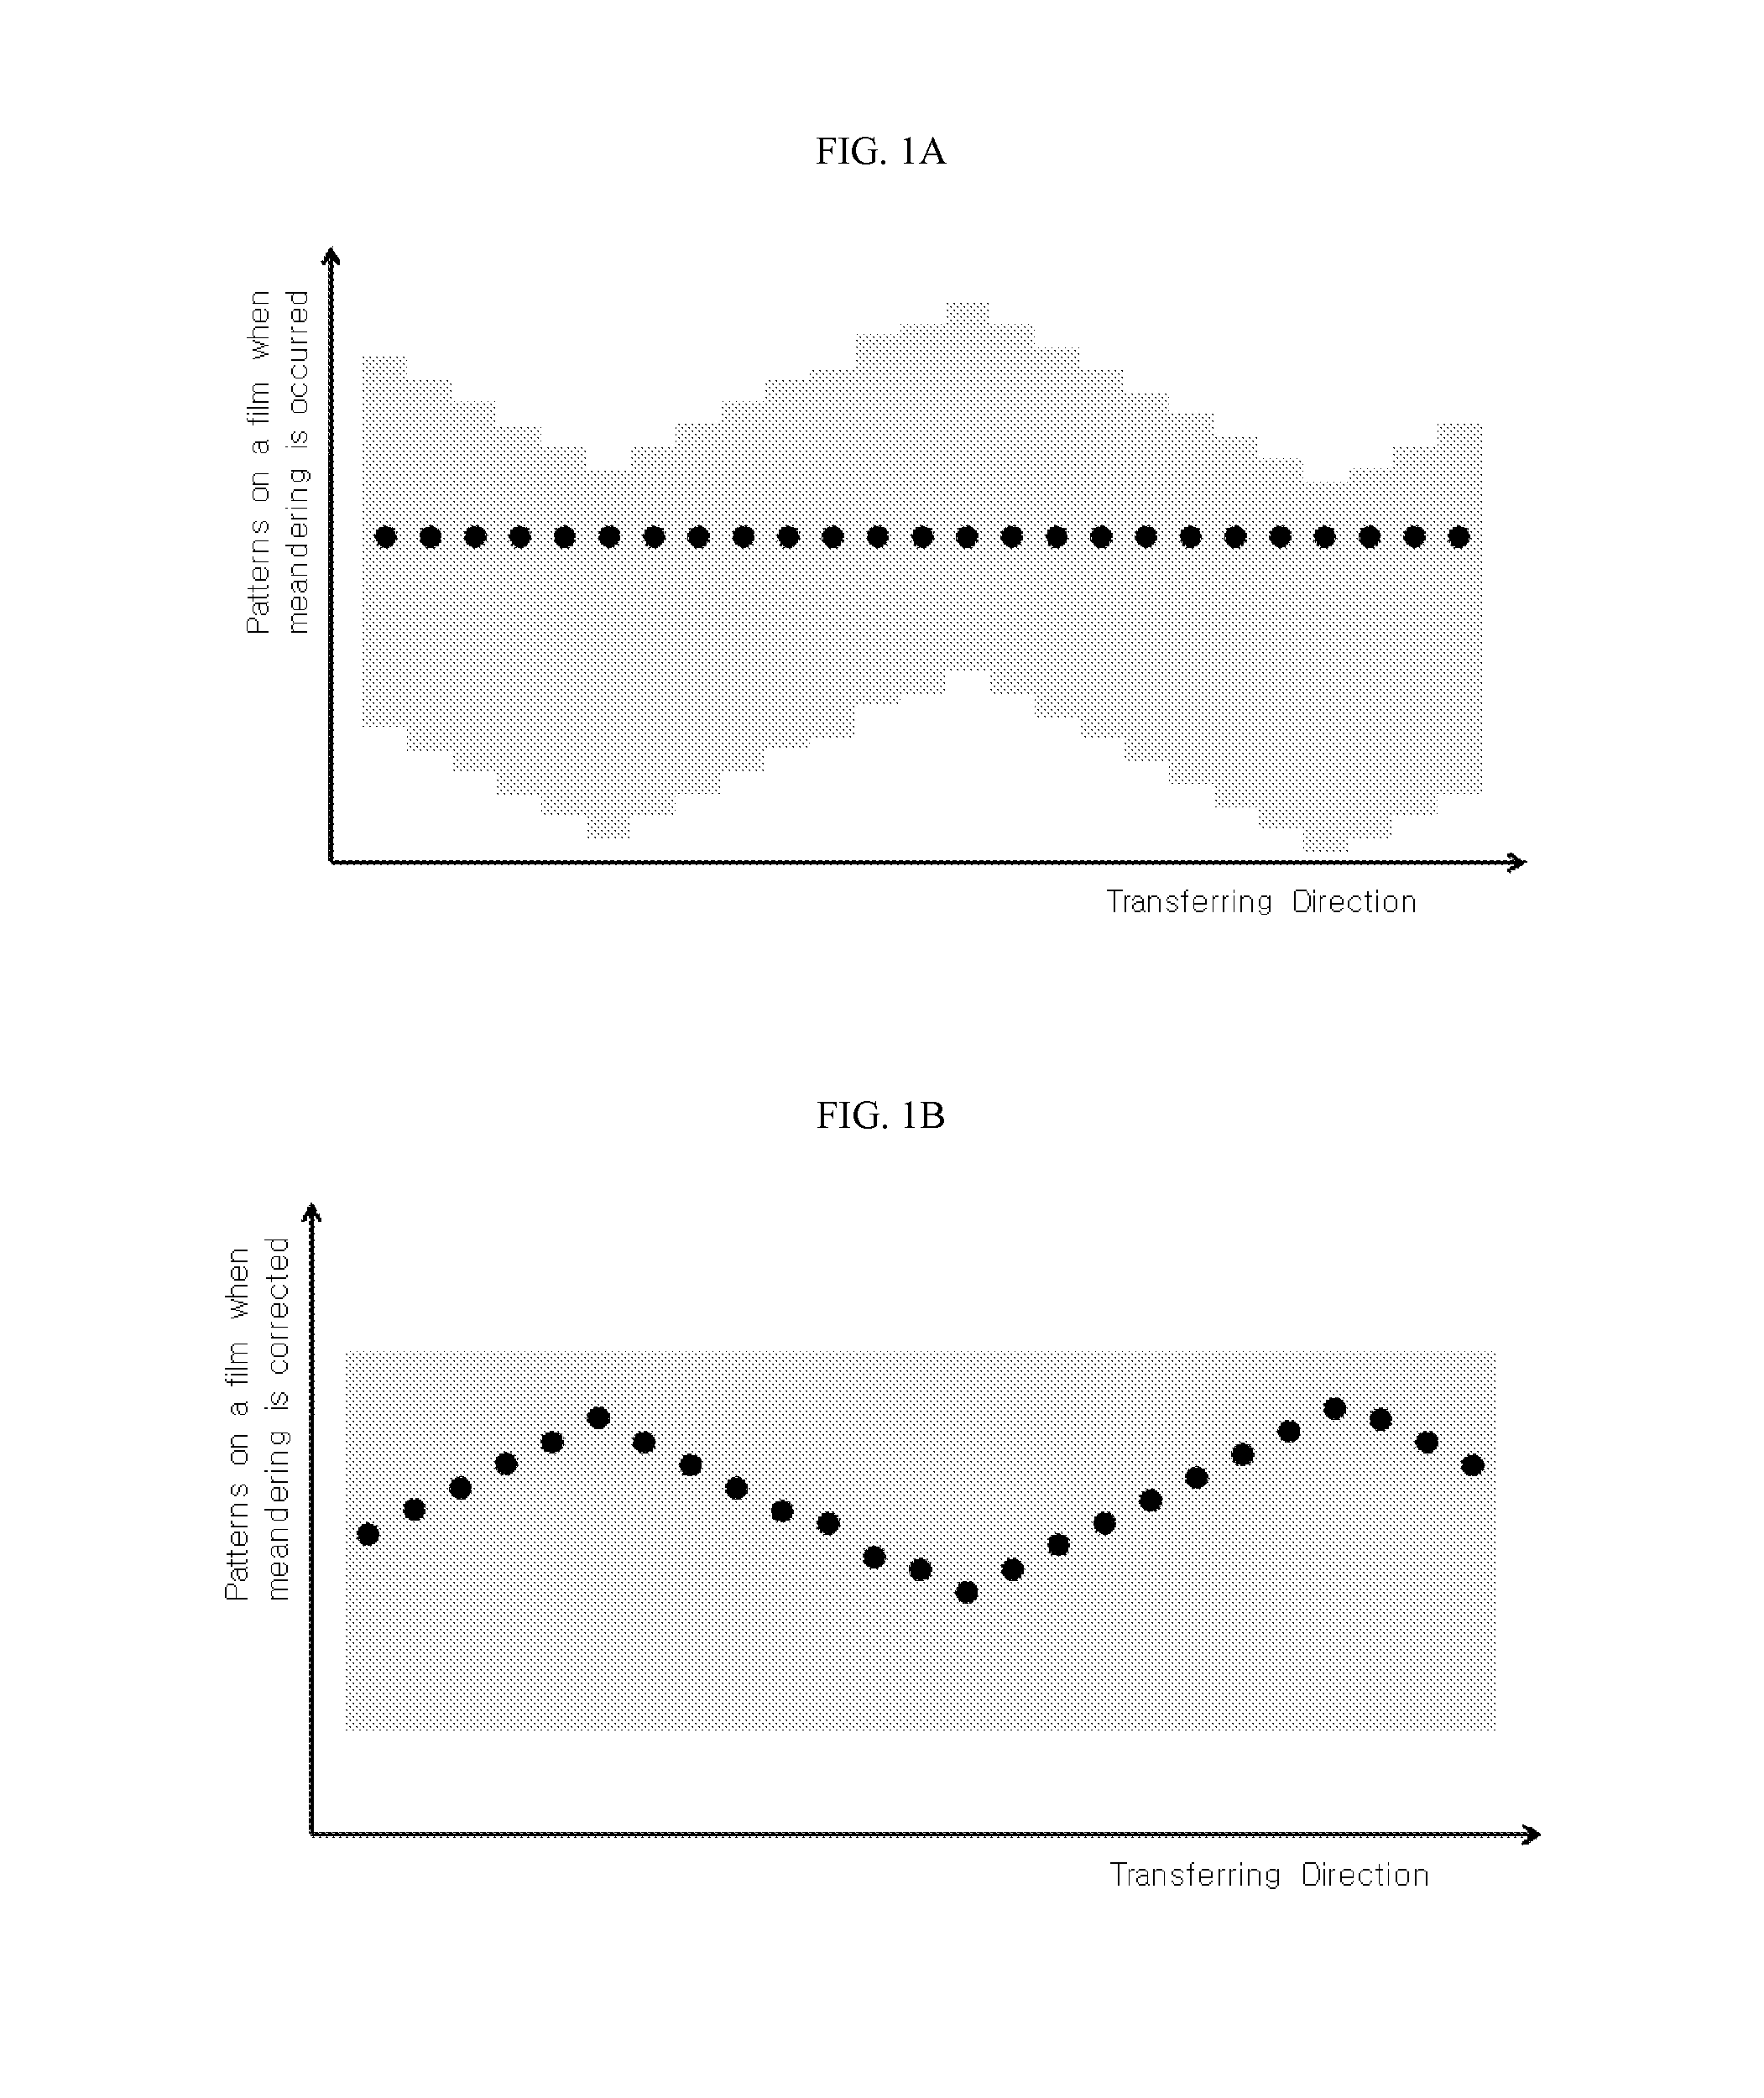 Control device for preventing meandering of patterns on patterned films